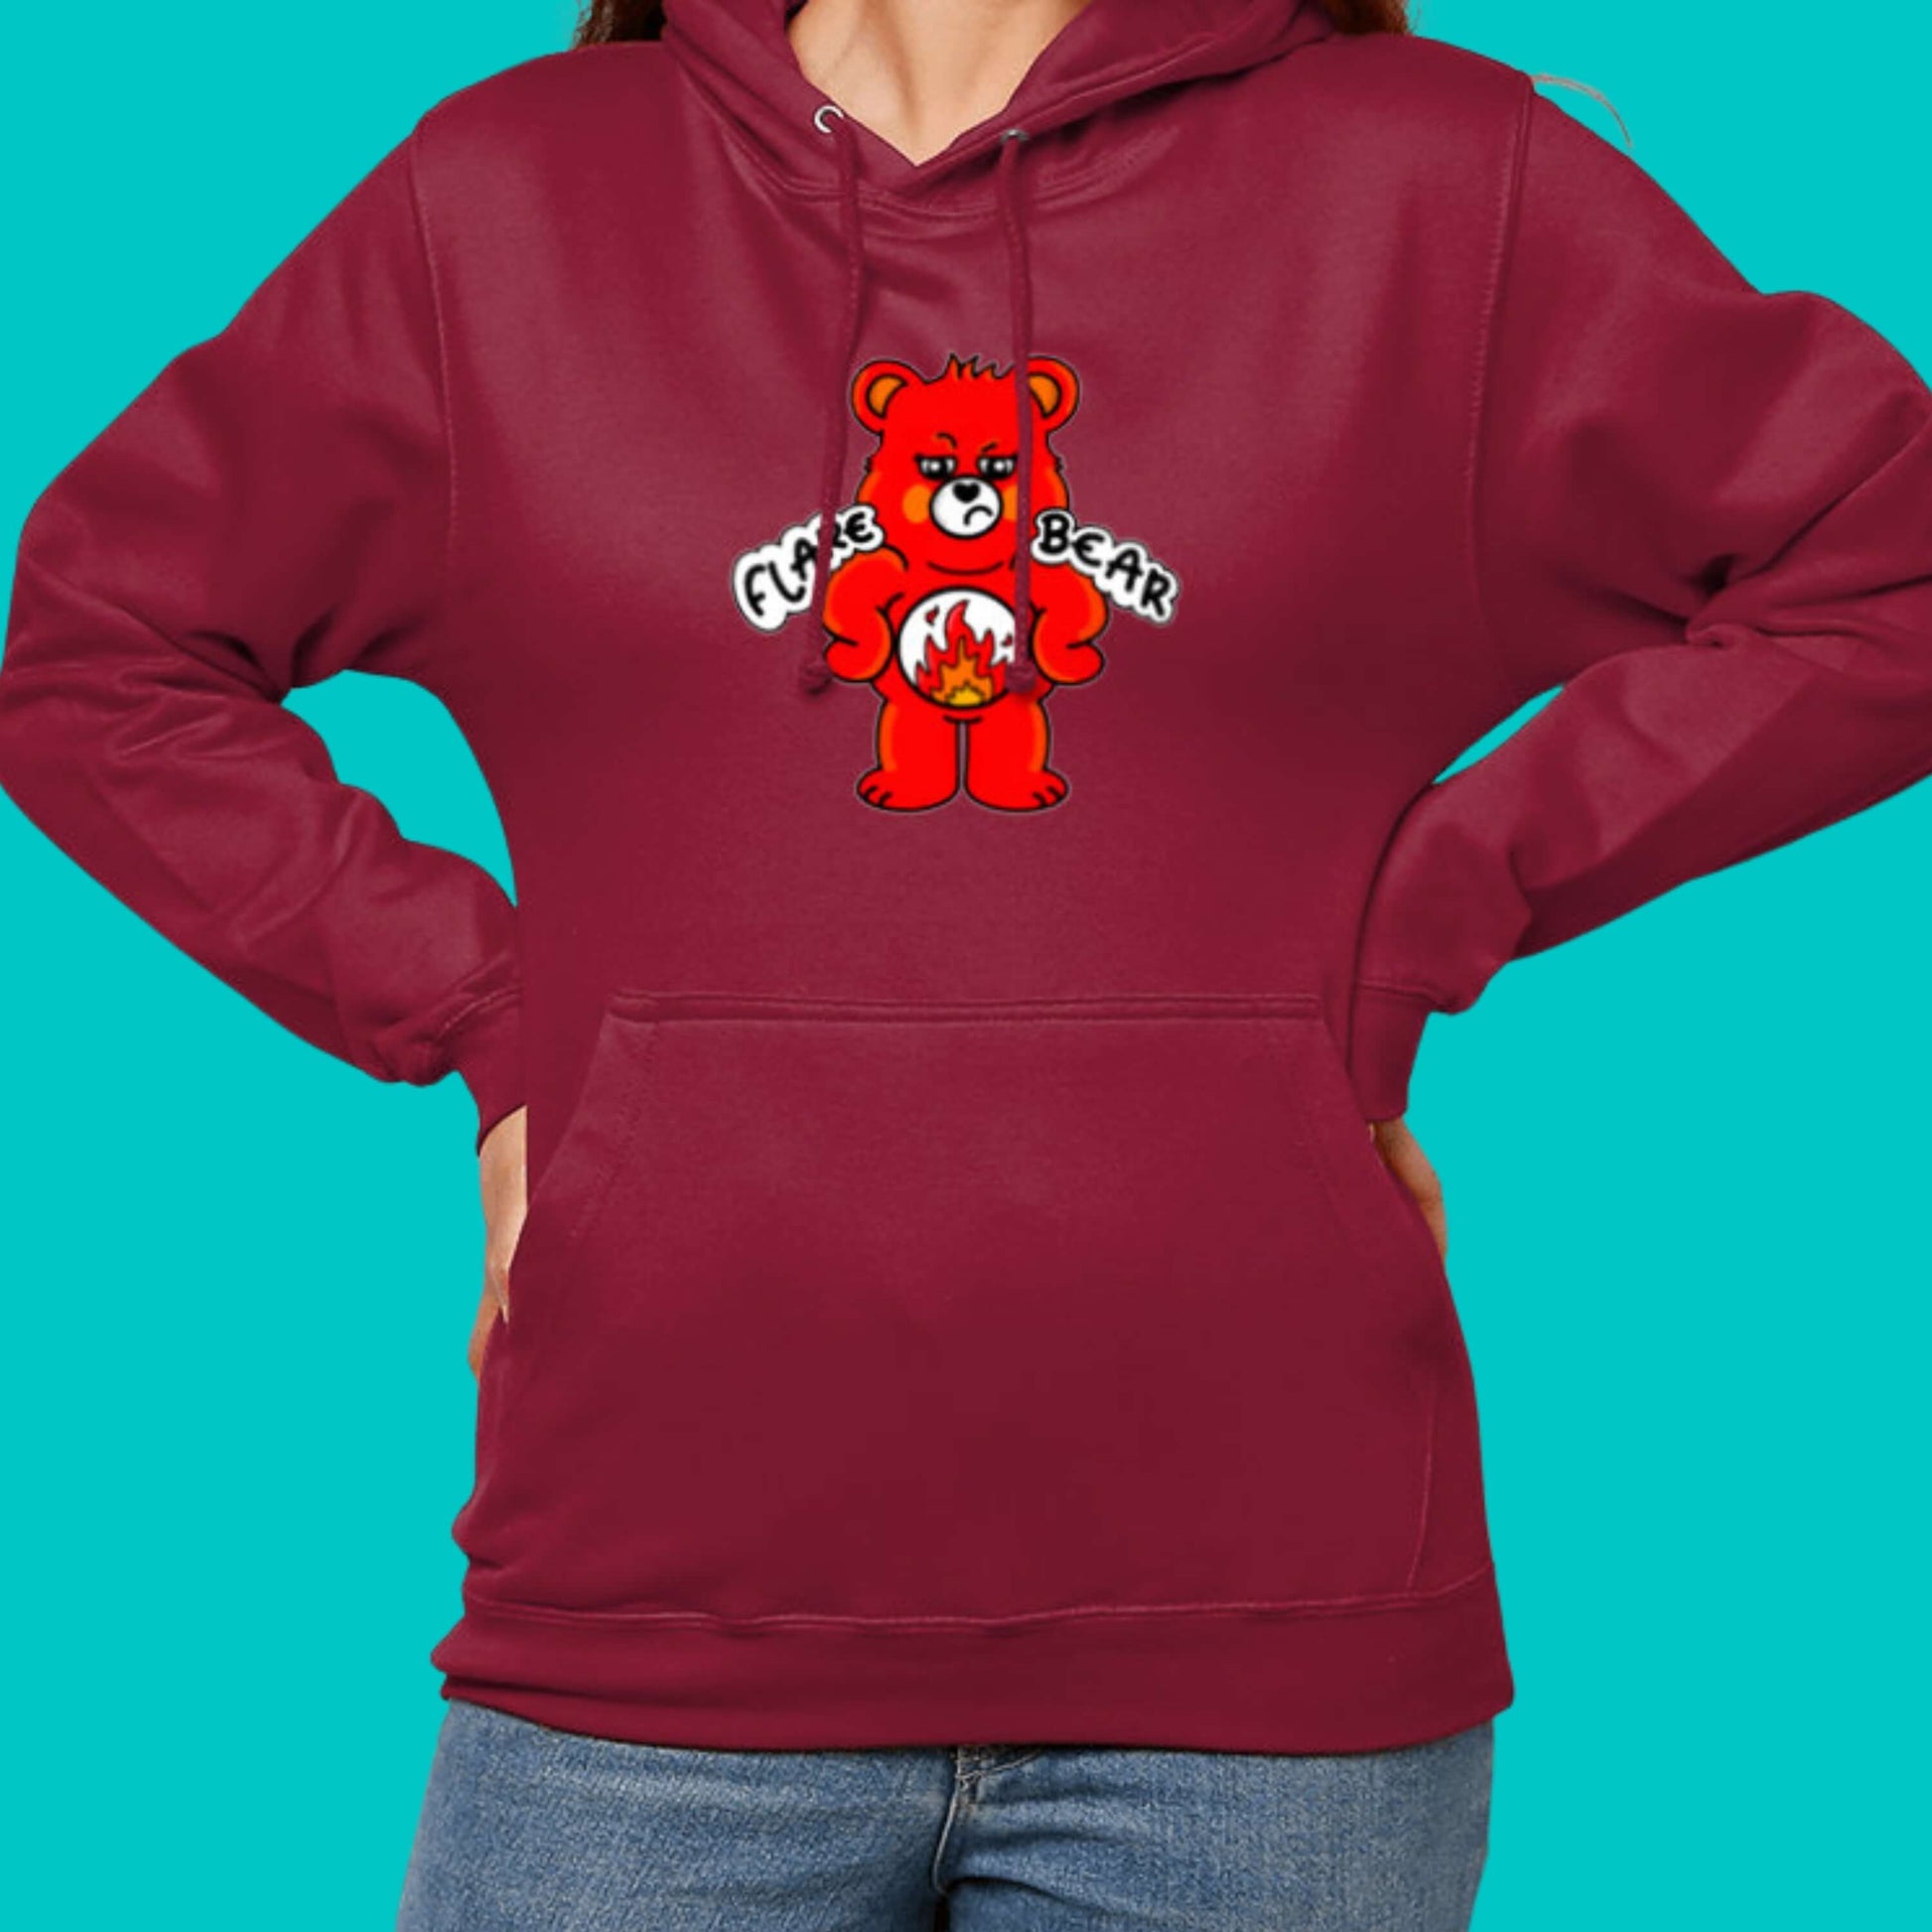 Flare Bear hoodie jumper in red hot chilli modelled by a femme person with brown hair wearing blue jeans on a blue background. The hoodie is of a red bear with a fed up expression and hands on its hips. There is a white circle on its belly with flames inside. Flare Bear is written on the hoodie. The hoodie is designed to raise awareness for chronic illness flare ups.